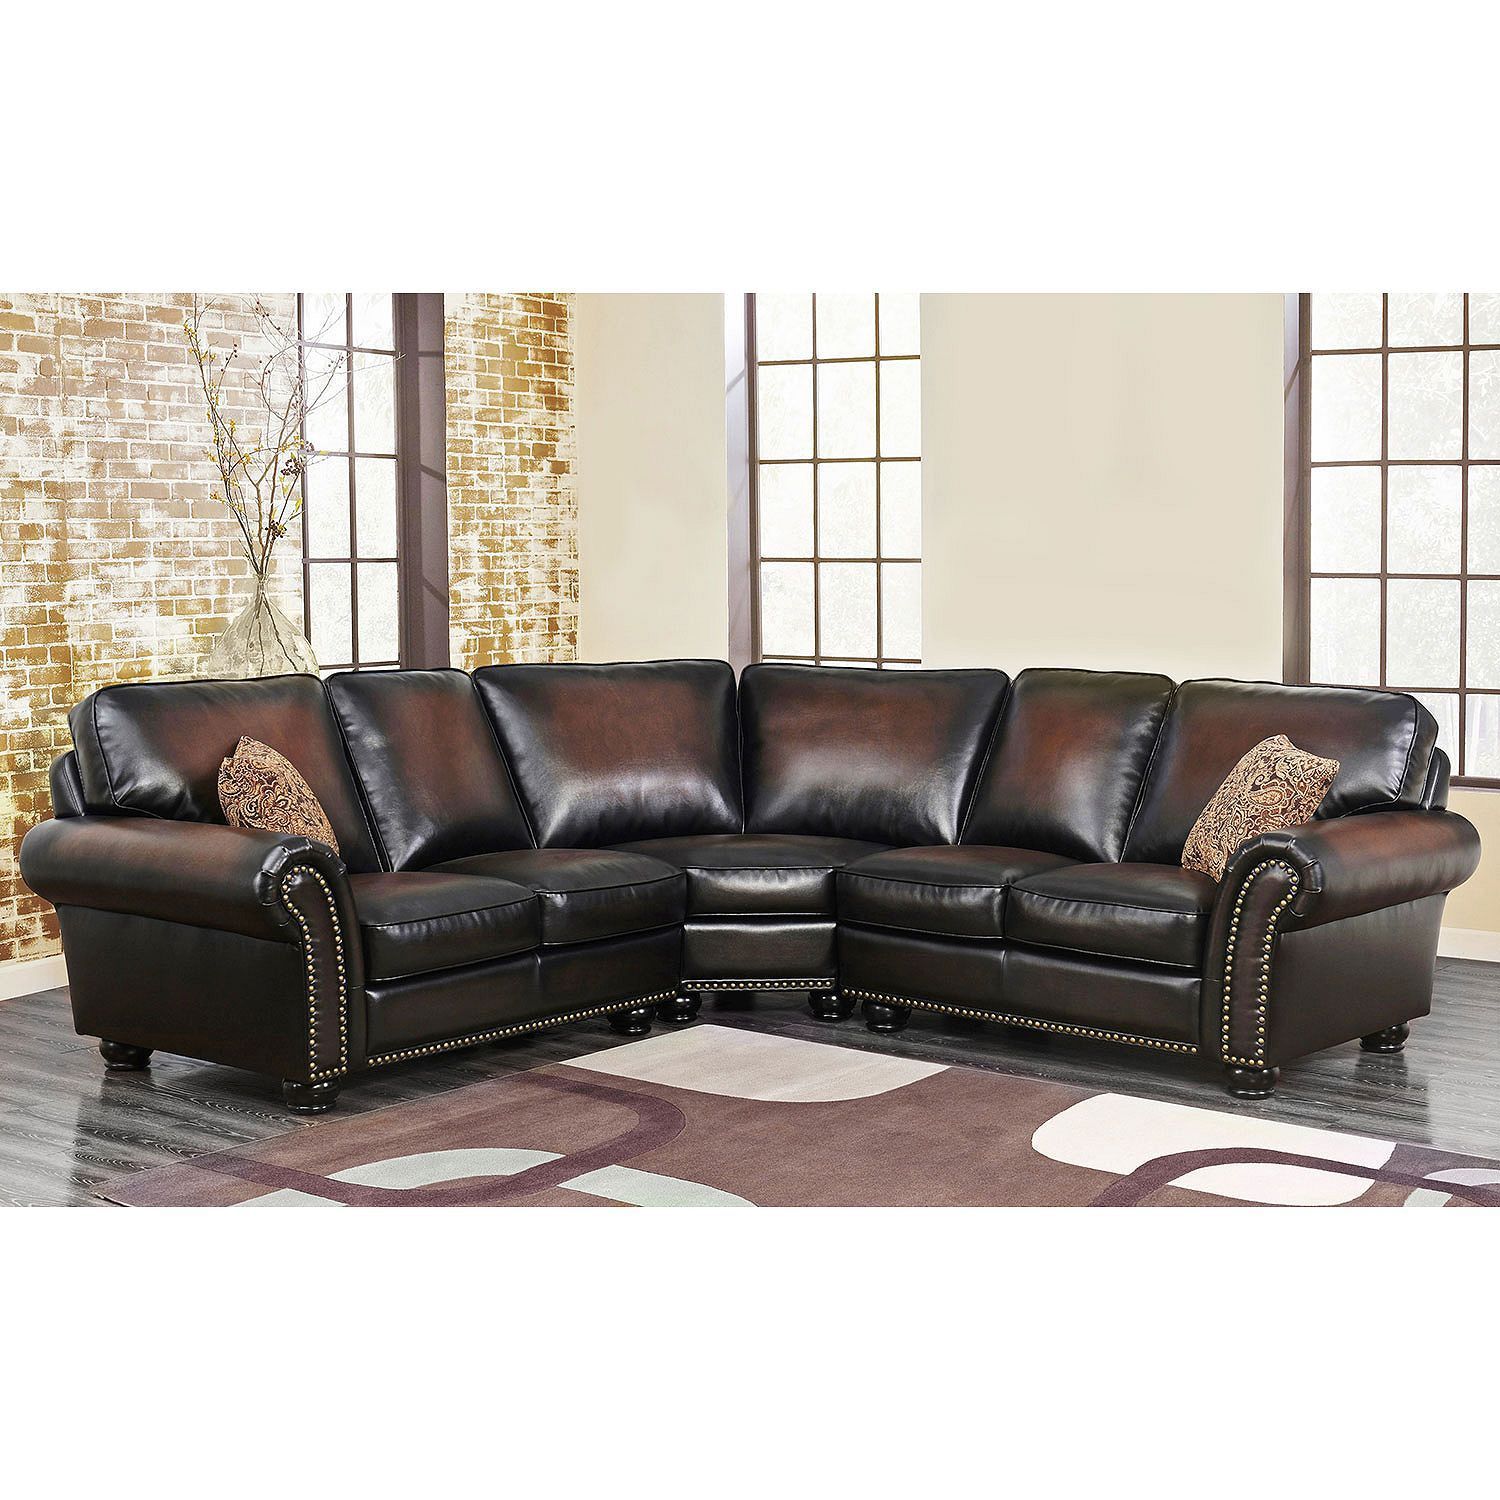 Melrose Leather 3 Piece Sectional – Sam's Club With 3 Piece Leather Sectional Sofa Sets (Gallery 9 of 20)